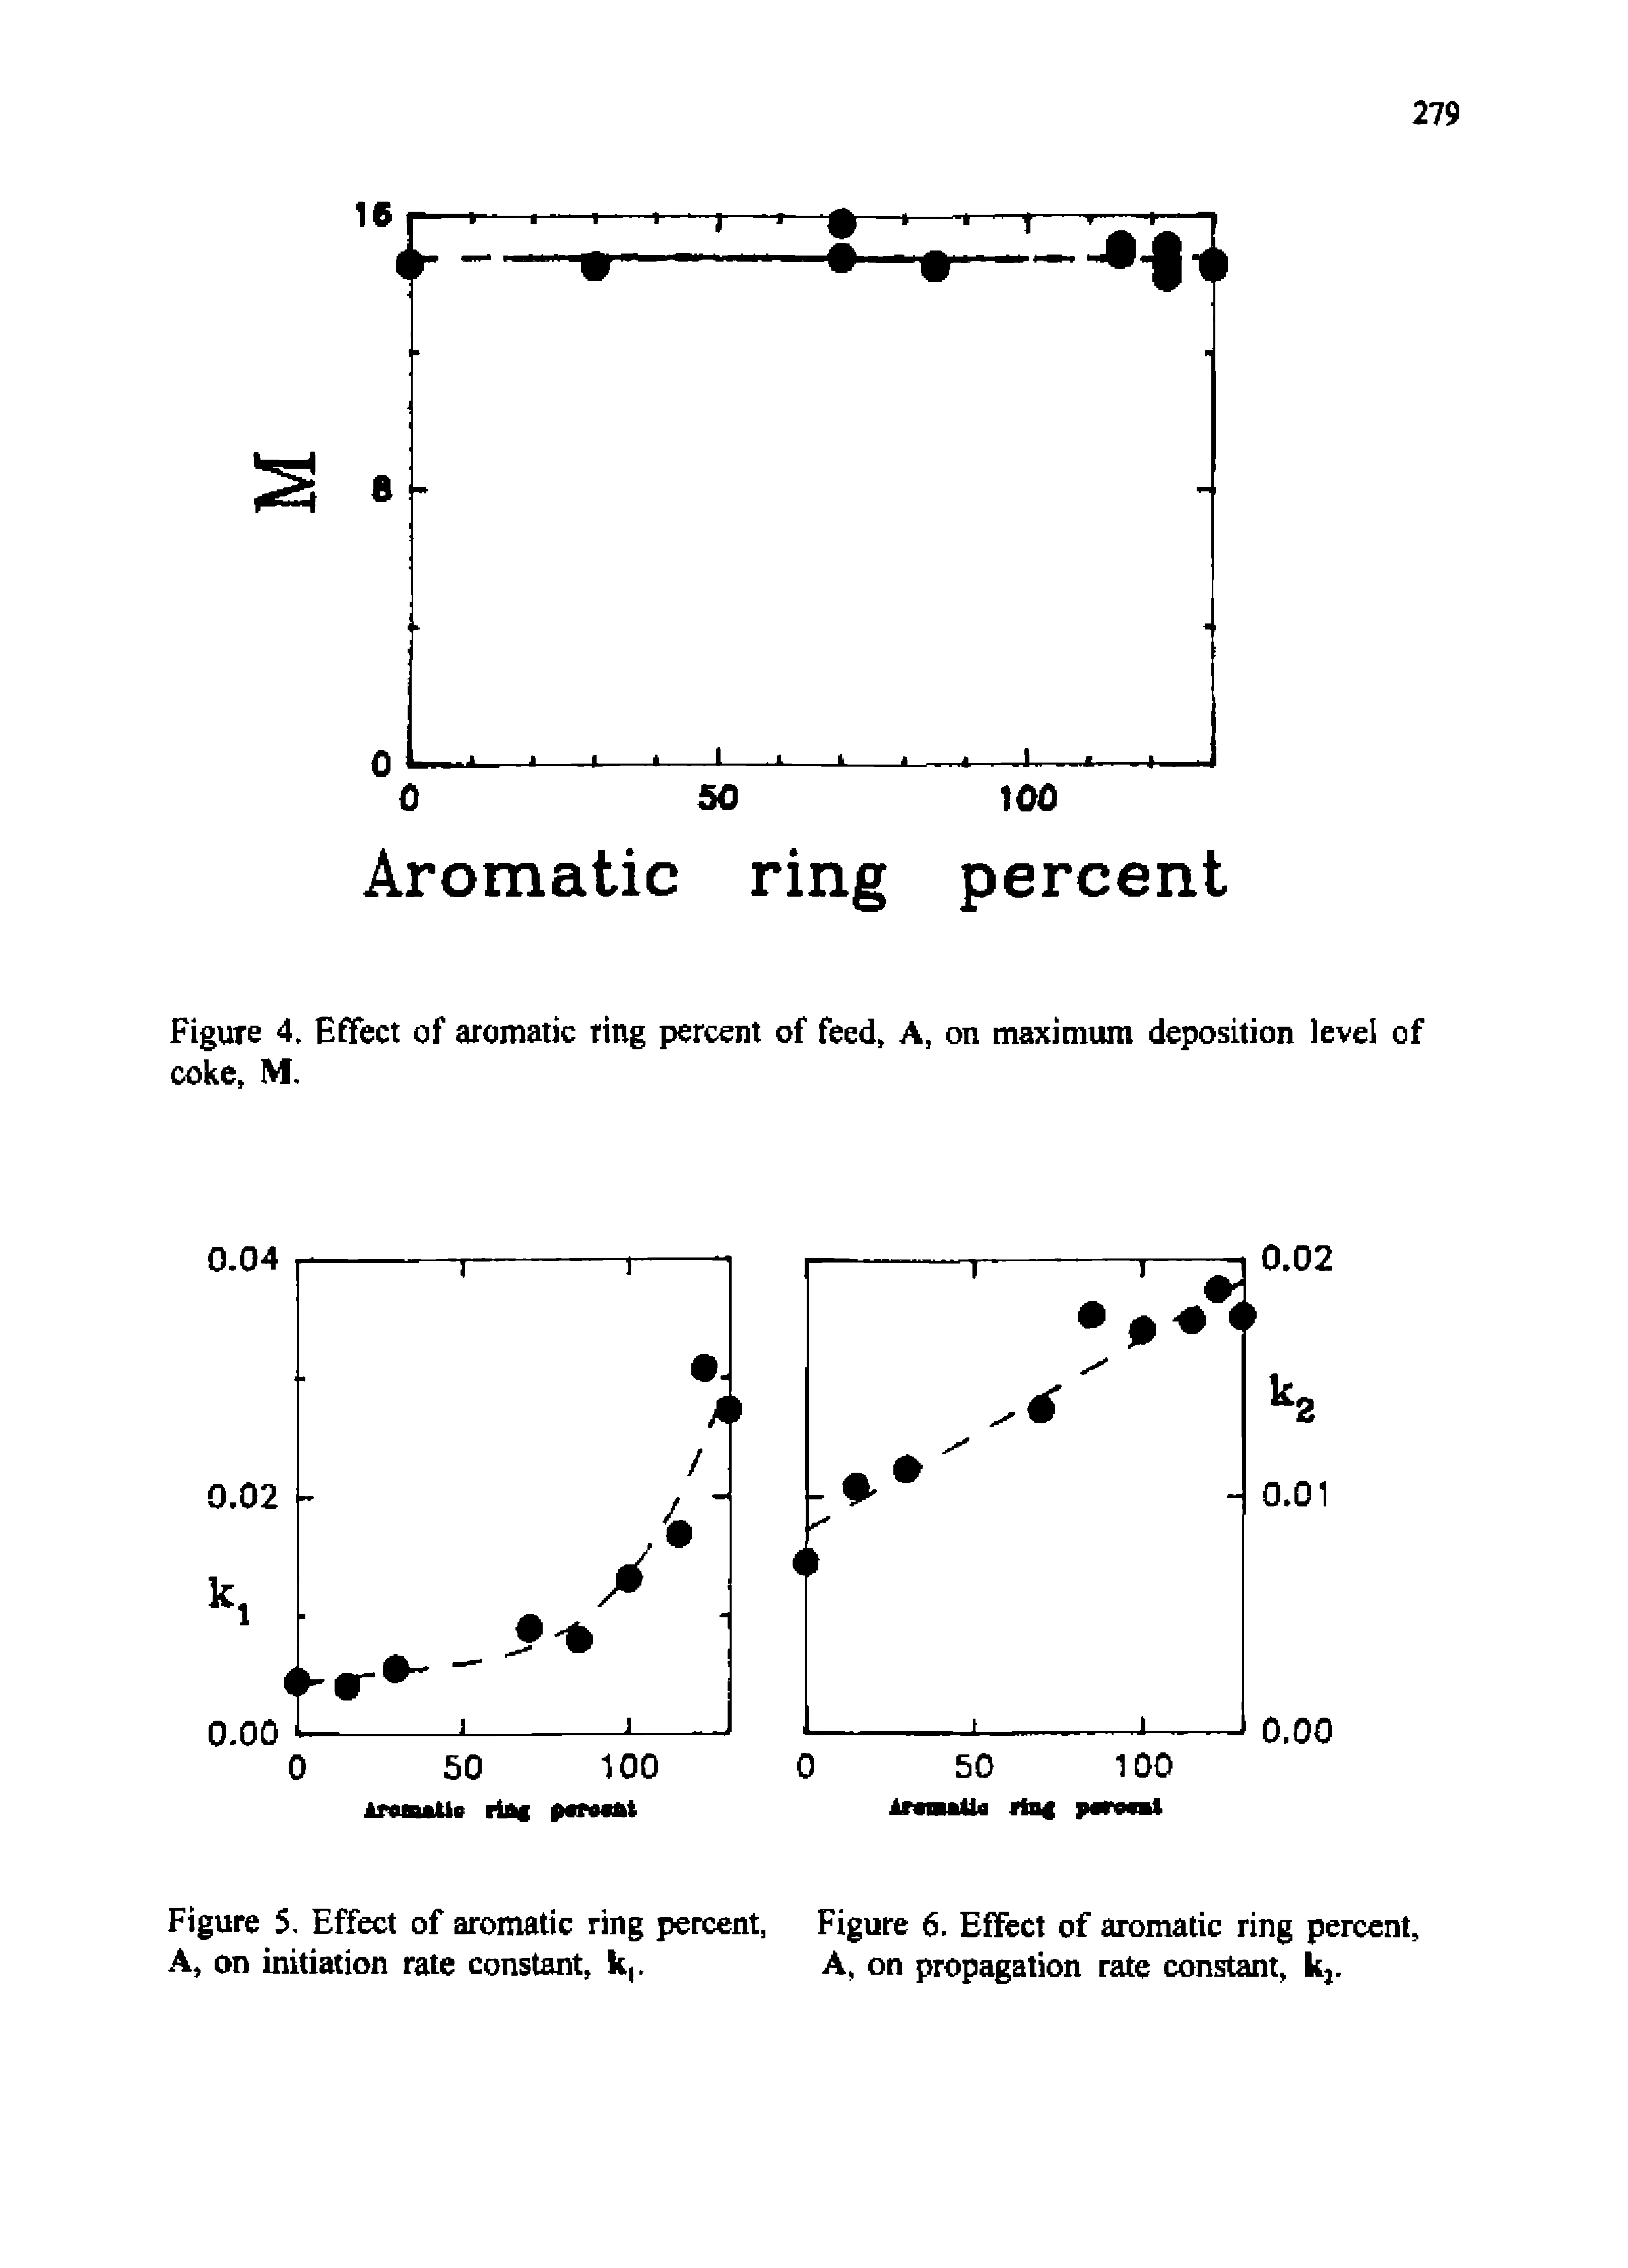 Figure 4. Effect of aromatic ring percent of feed, A, on maximum deposition level of coke, M,...